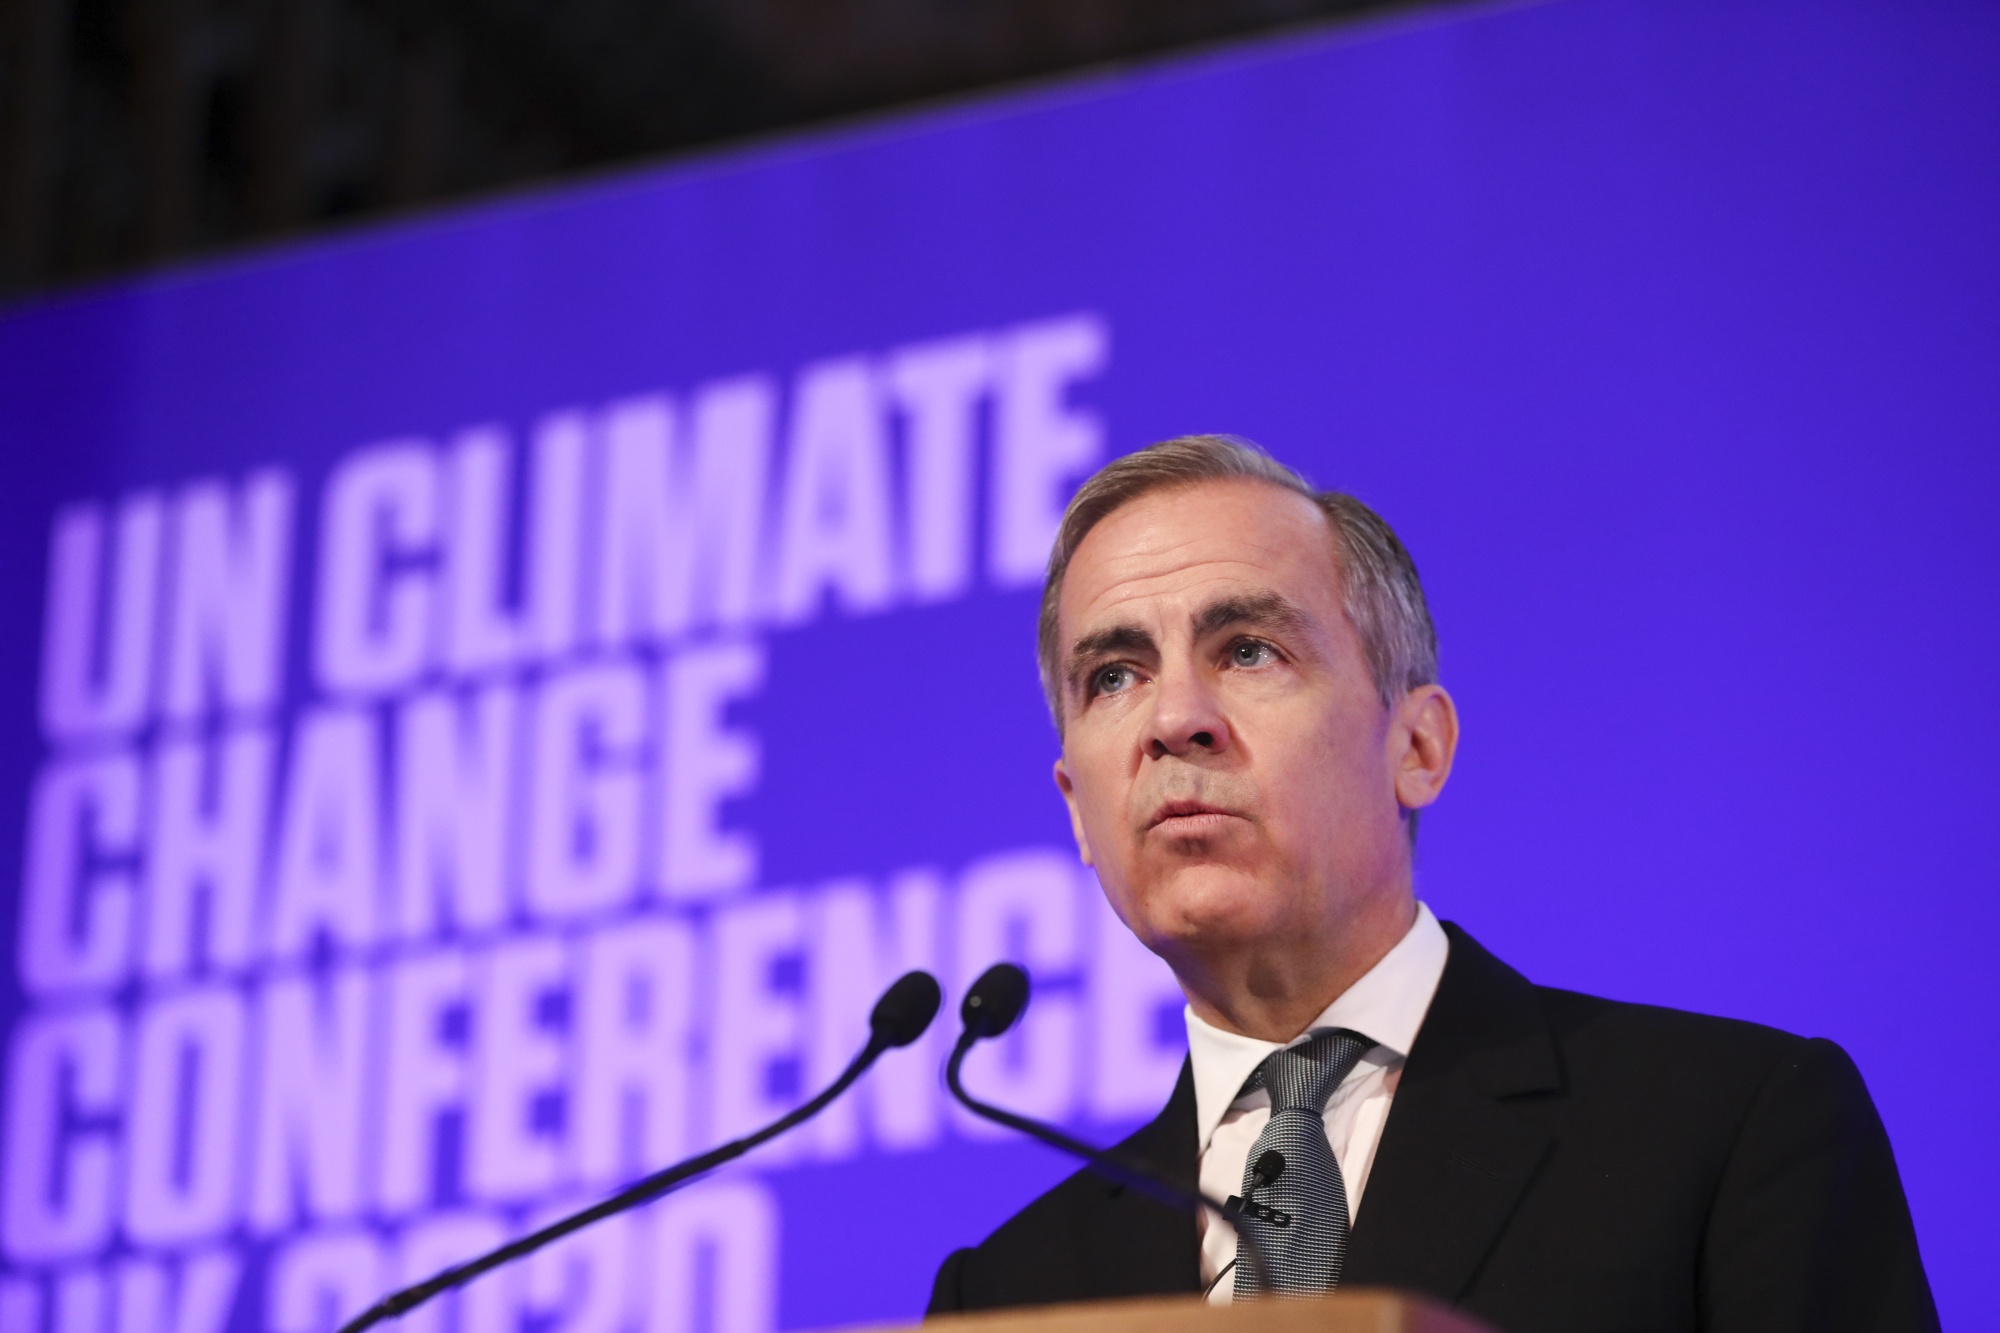 Mark Carney speaks at a United Nations even in London on Feb. 27, 2020.